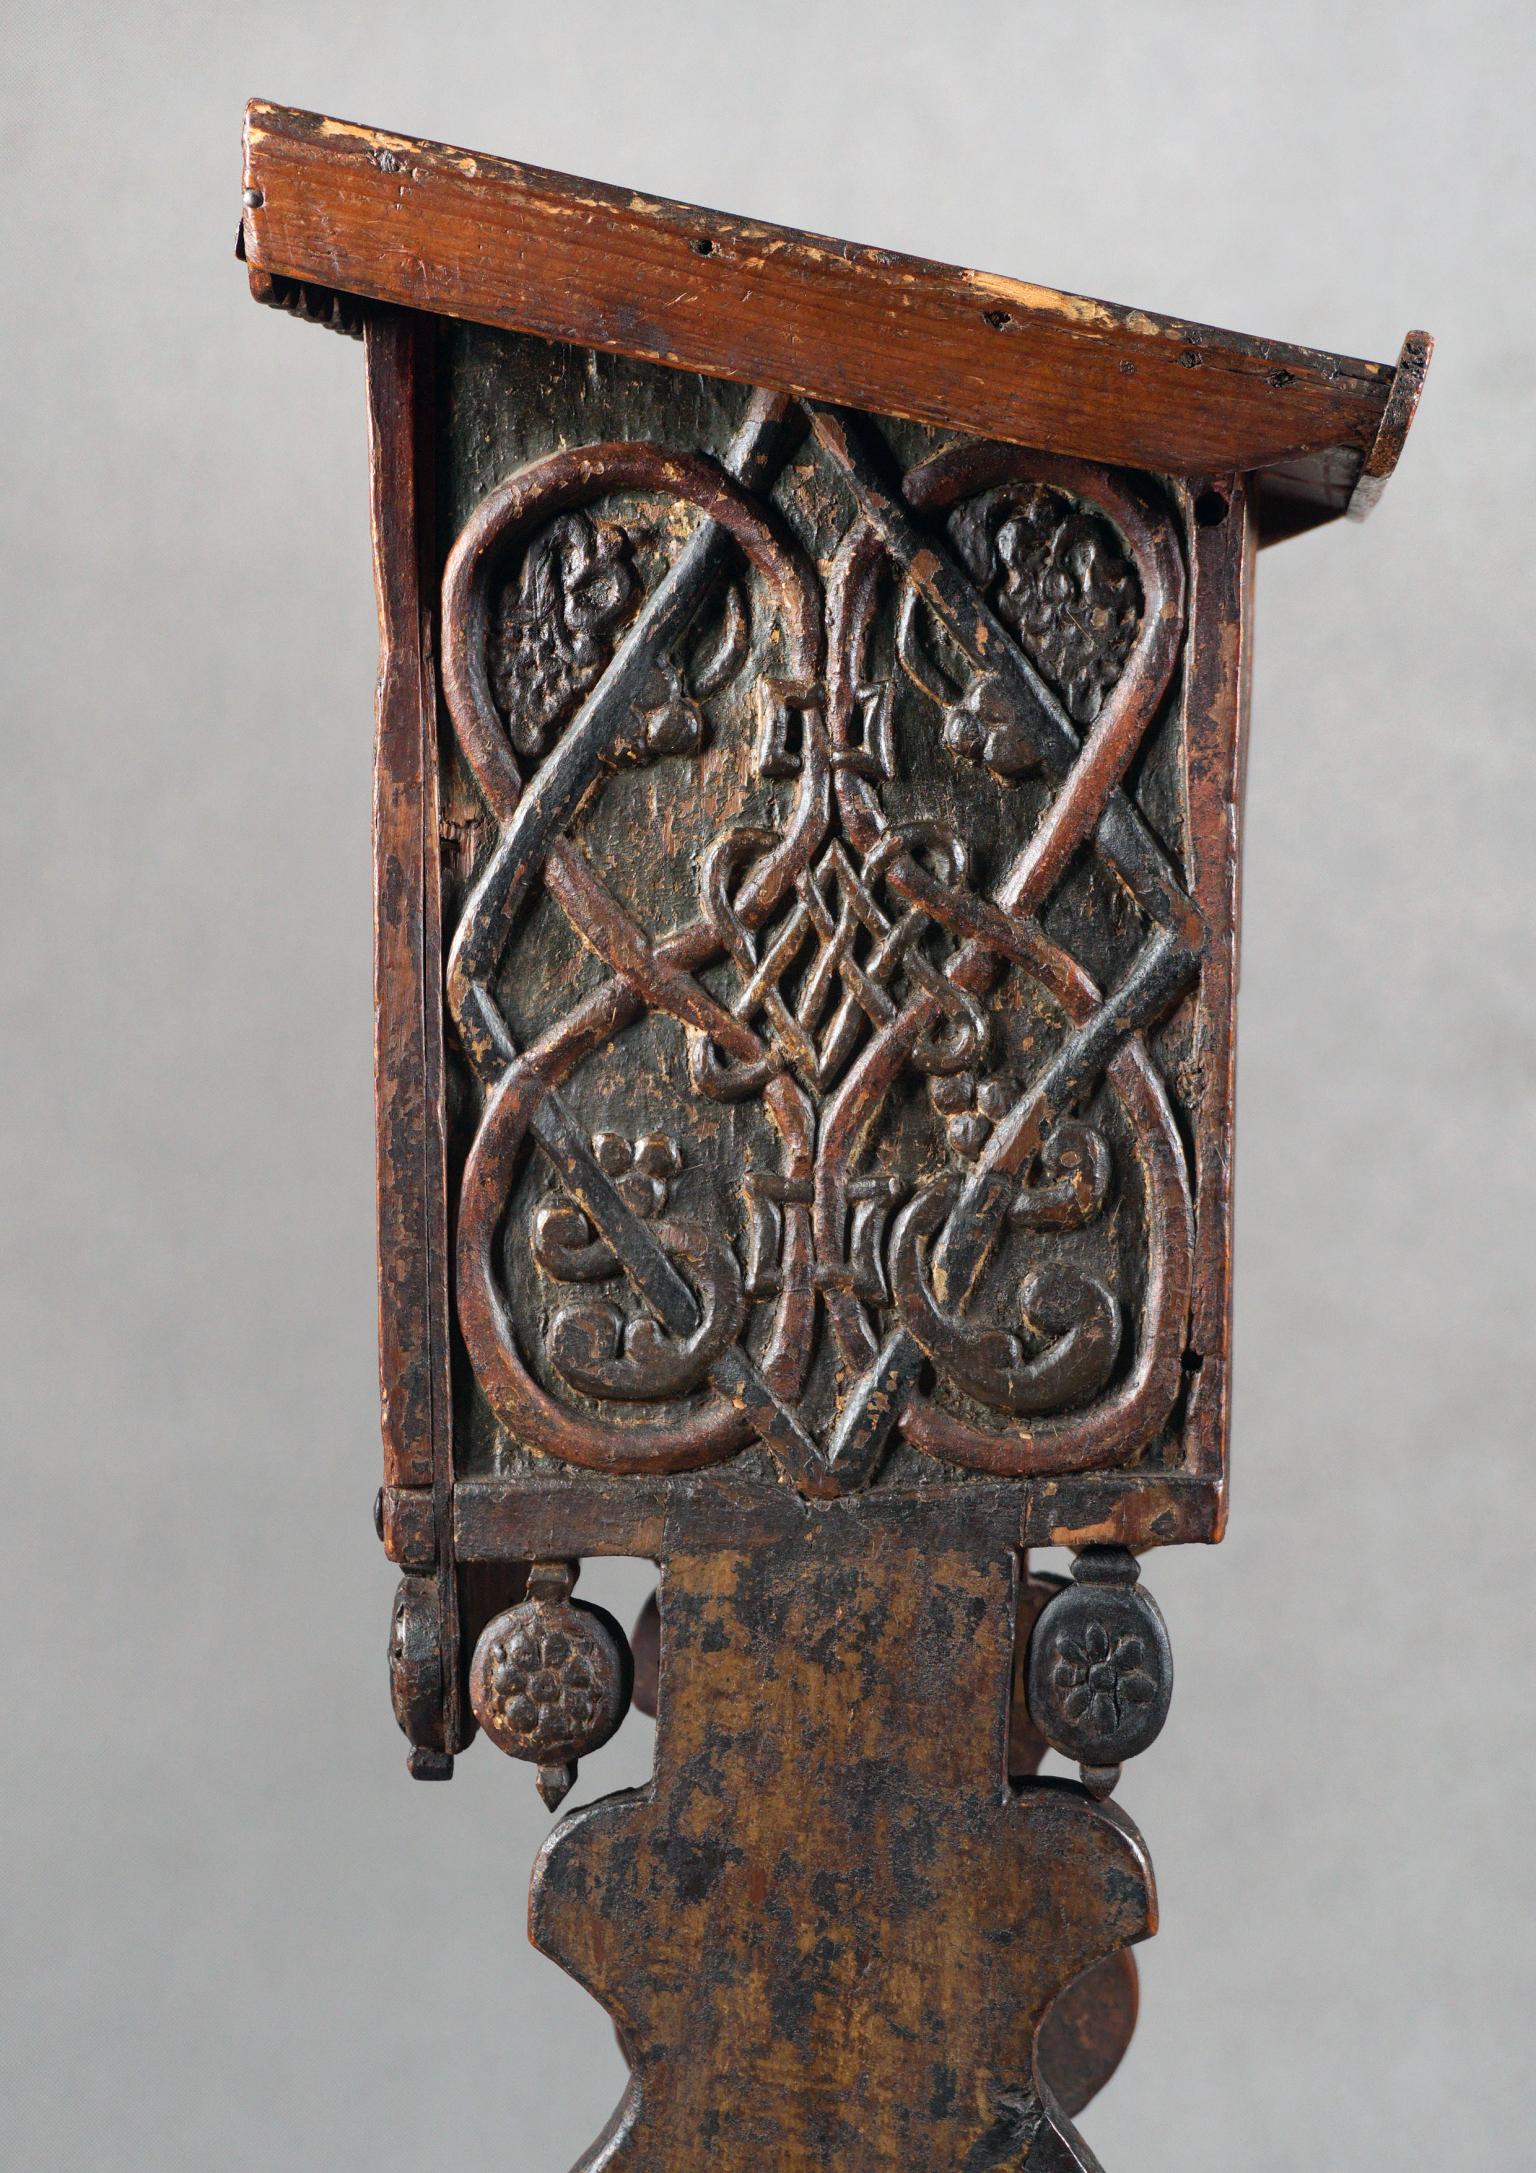 Wooden lectern with decorations.